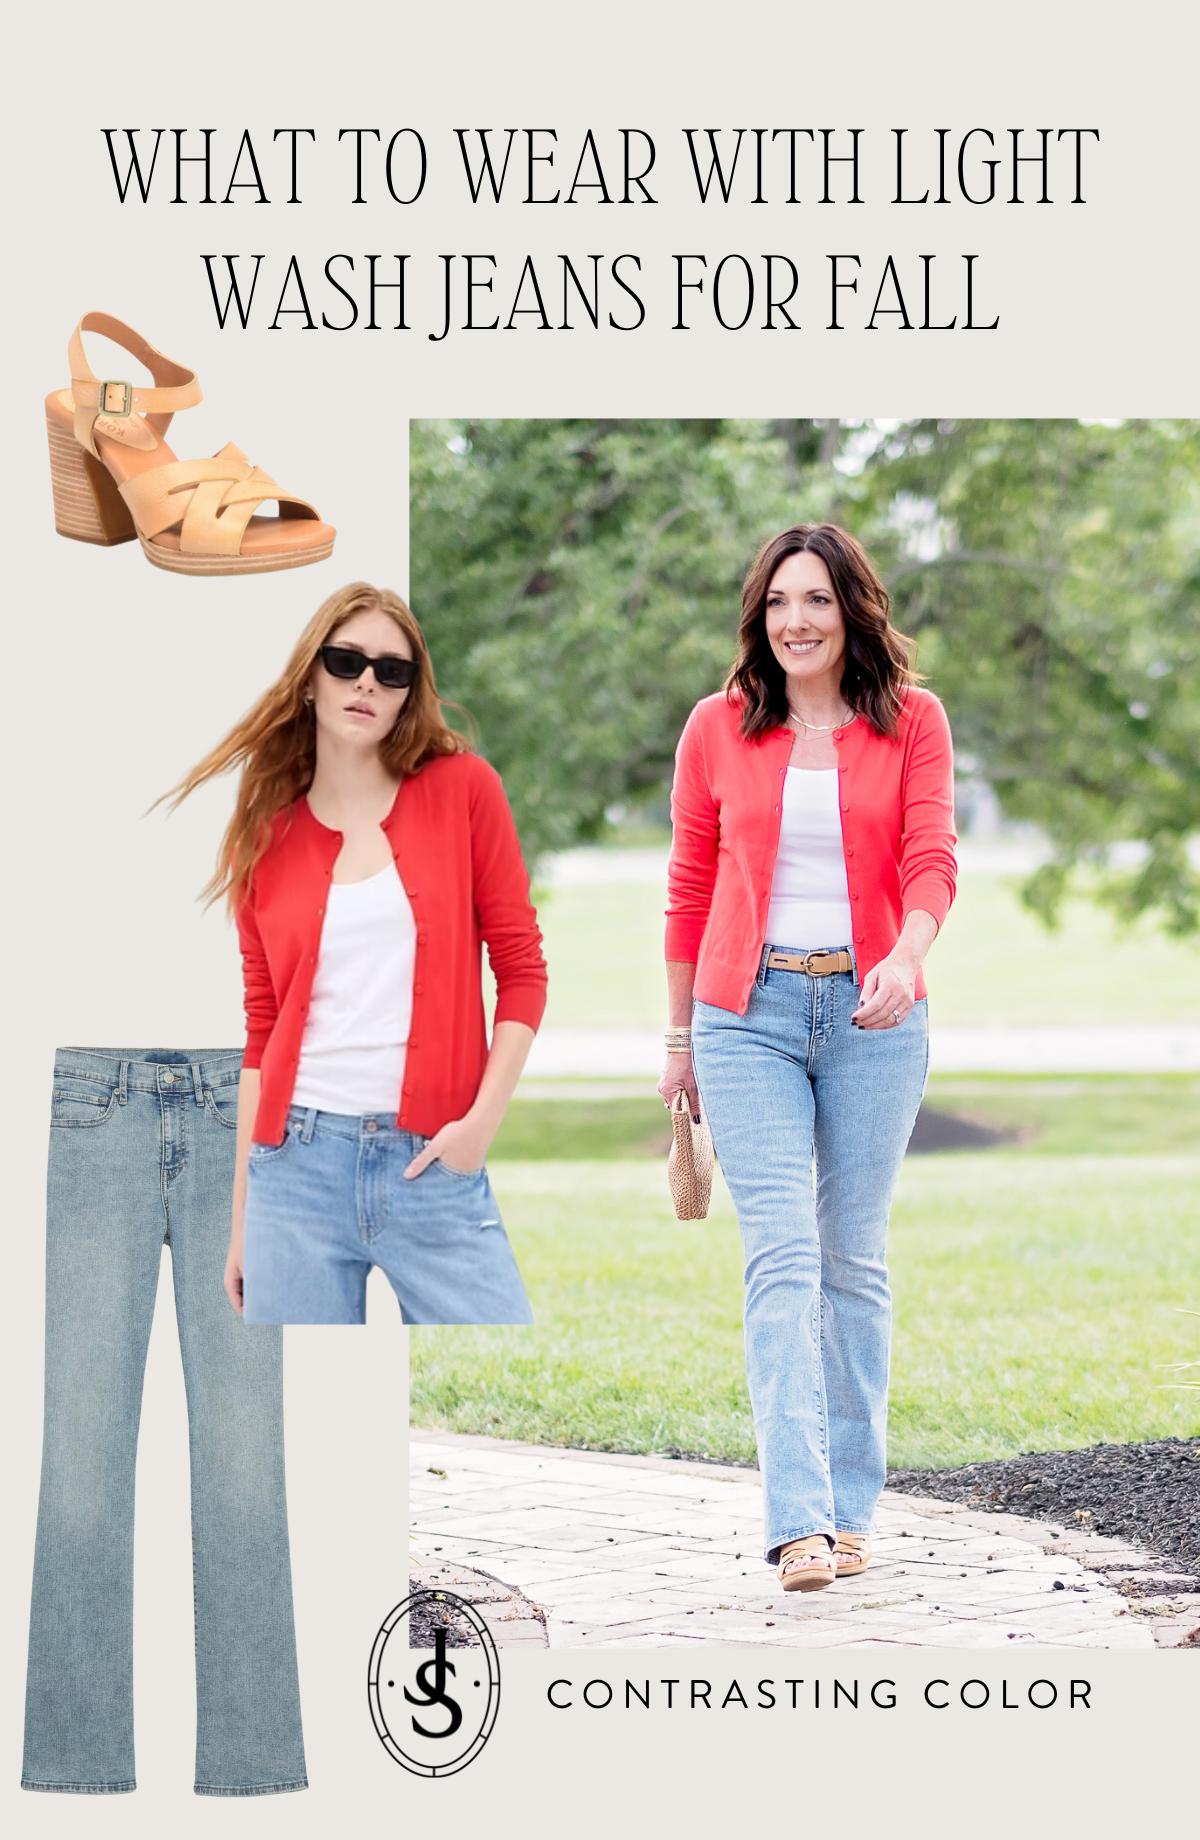 What to Wear with Light Wash Jeans for Fall: A Contrasting Color